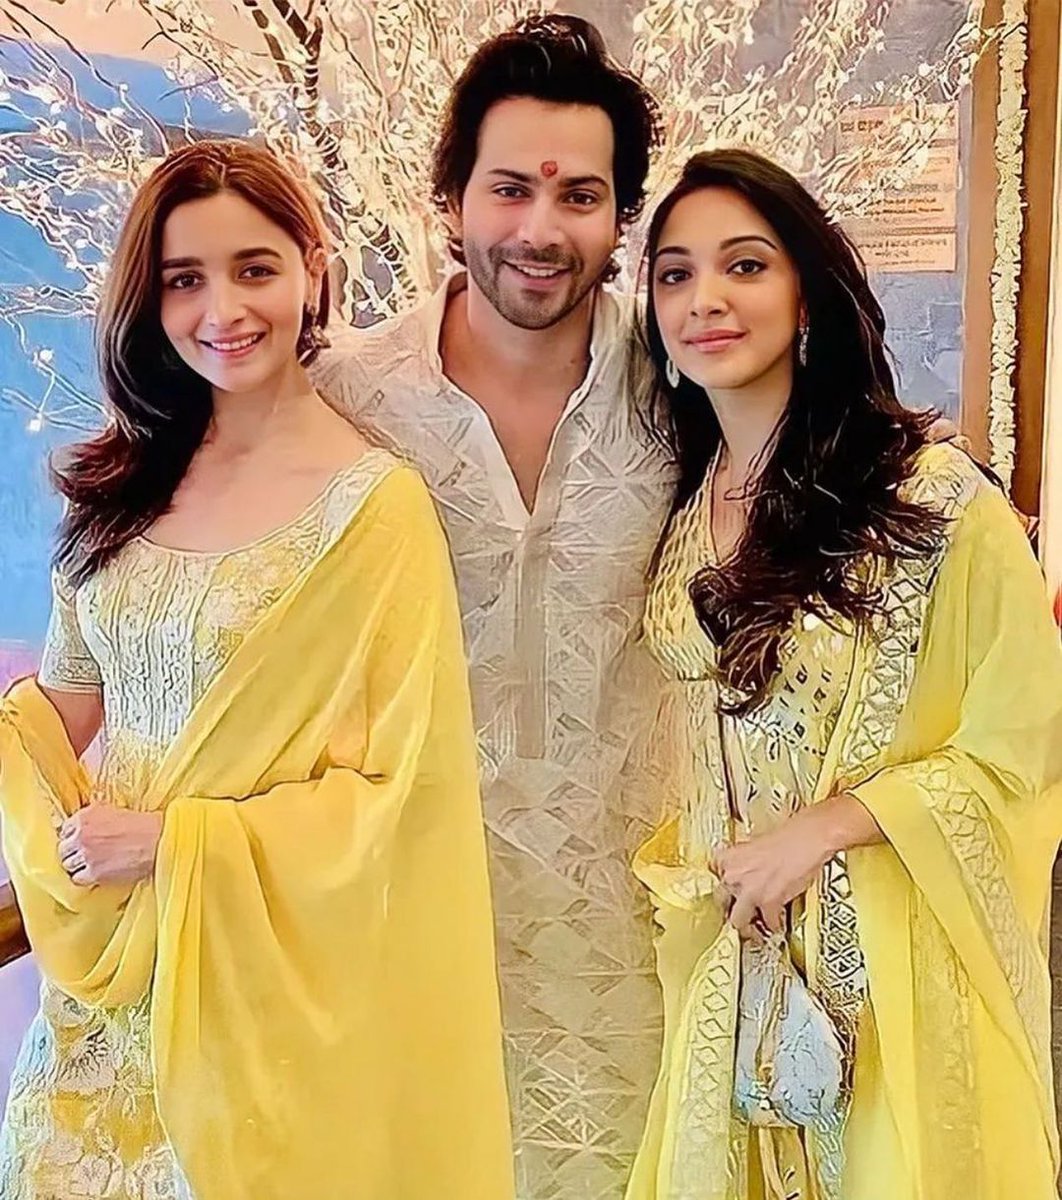 Starting our day off with this picture of @varundvn @aliaabhatt and @kiaraaliaadvani twinning in hues of Yellow 💛💛

.
.
.
#aliabhatt #kiaraadvani #varundhawan